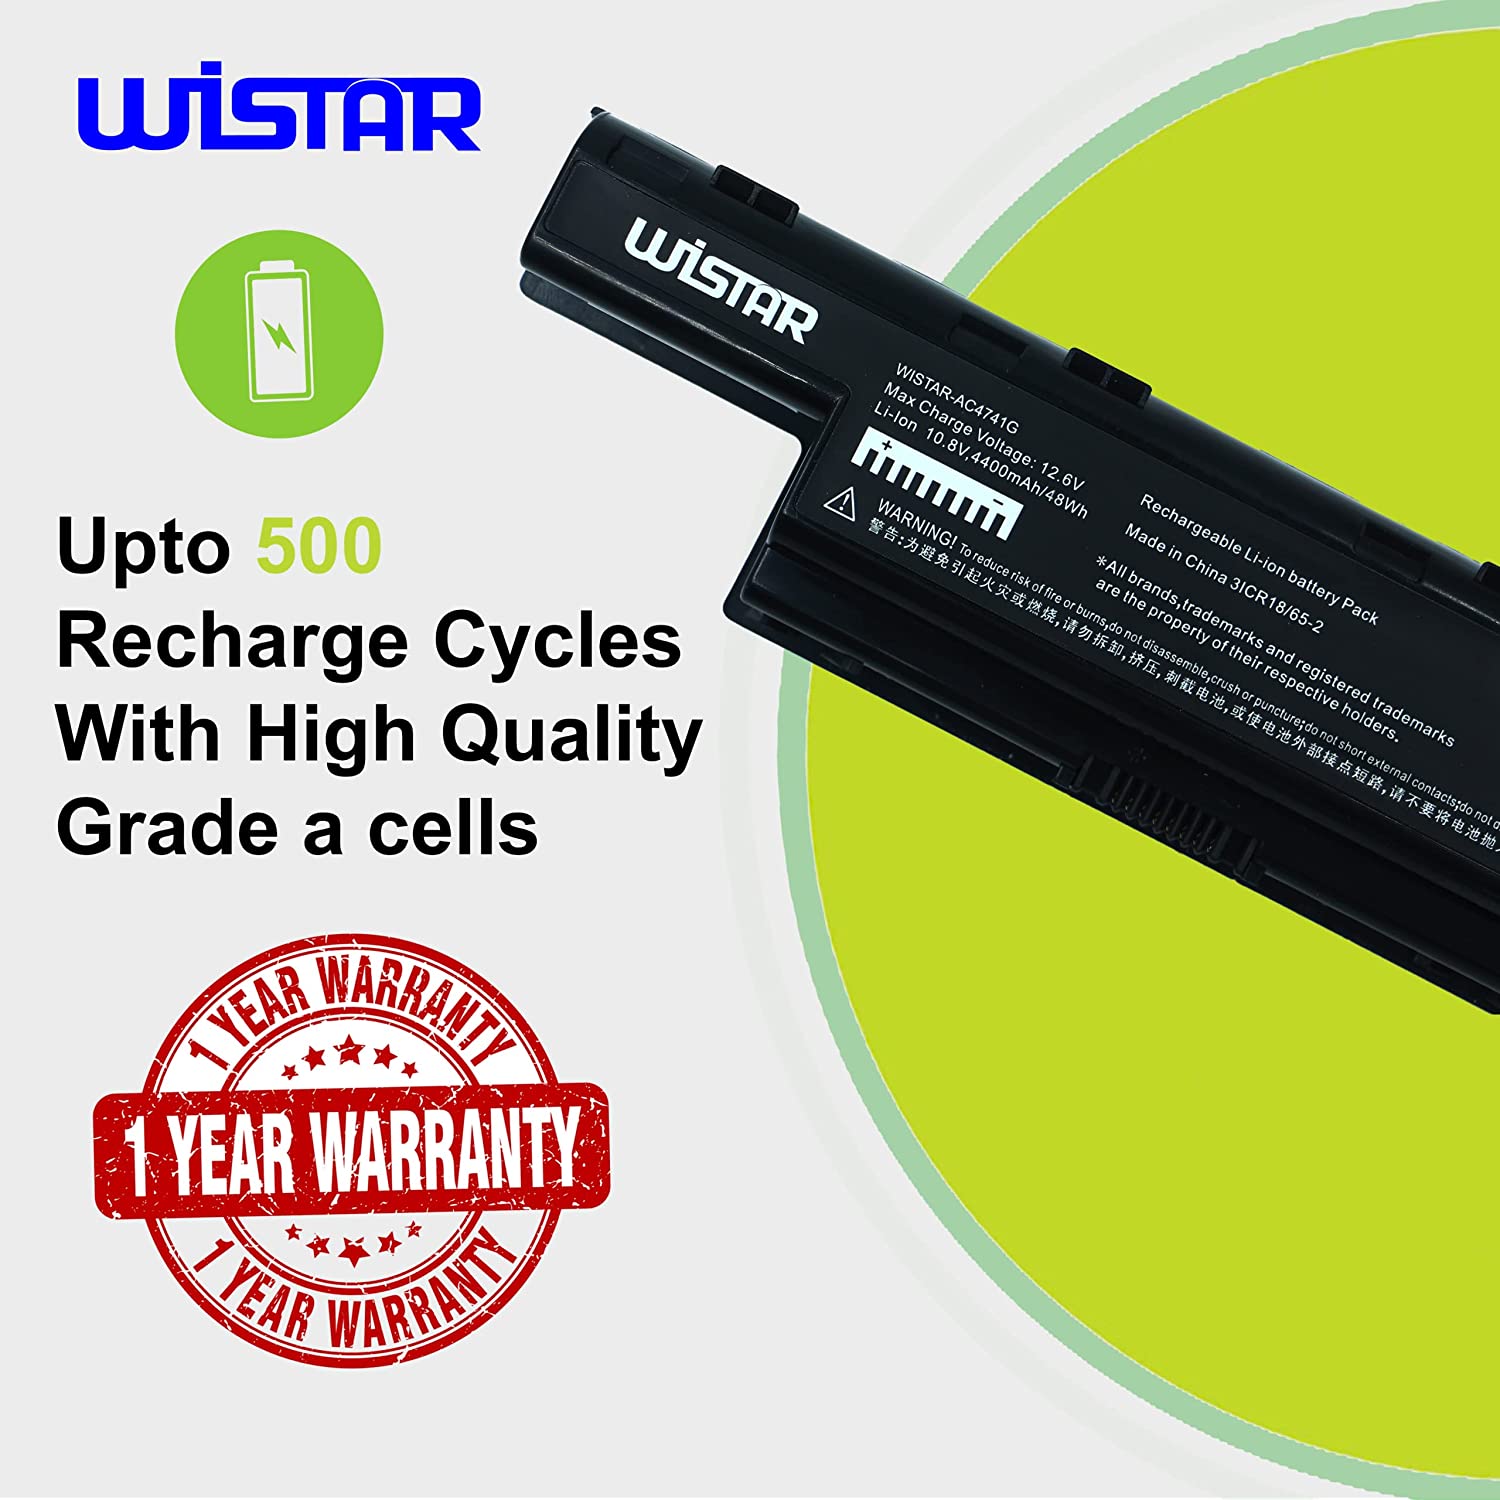 WISTAR AS10D31 AS10D51 Laptop Battery for ACER Aspire 4253 4750 4551 4552 4738 4741 4771 5251 5253 5542 5551 5552 5560 5733 5741 5742 5750 7551 7552 7560 7741 7750 AS5741 Series